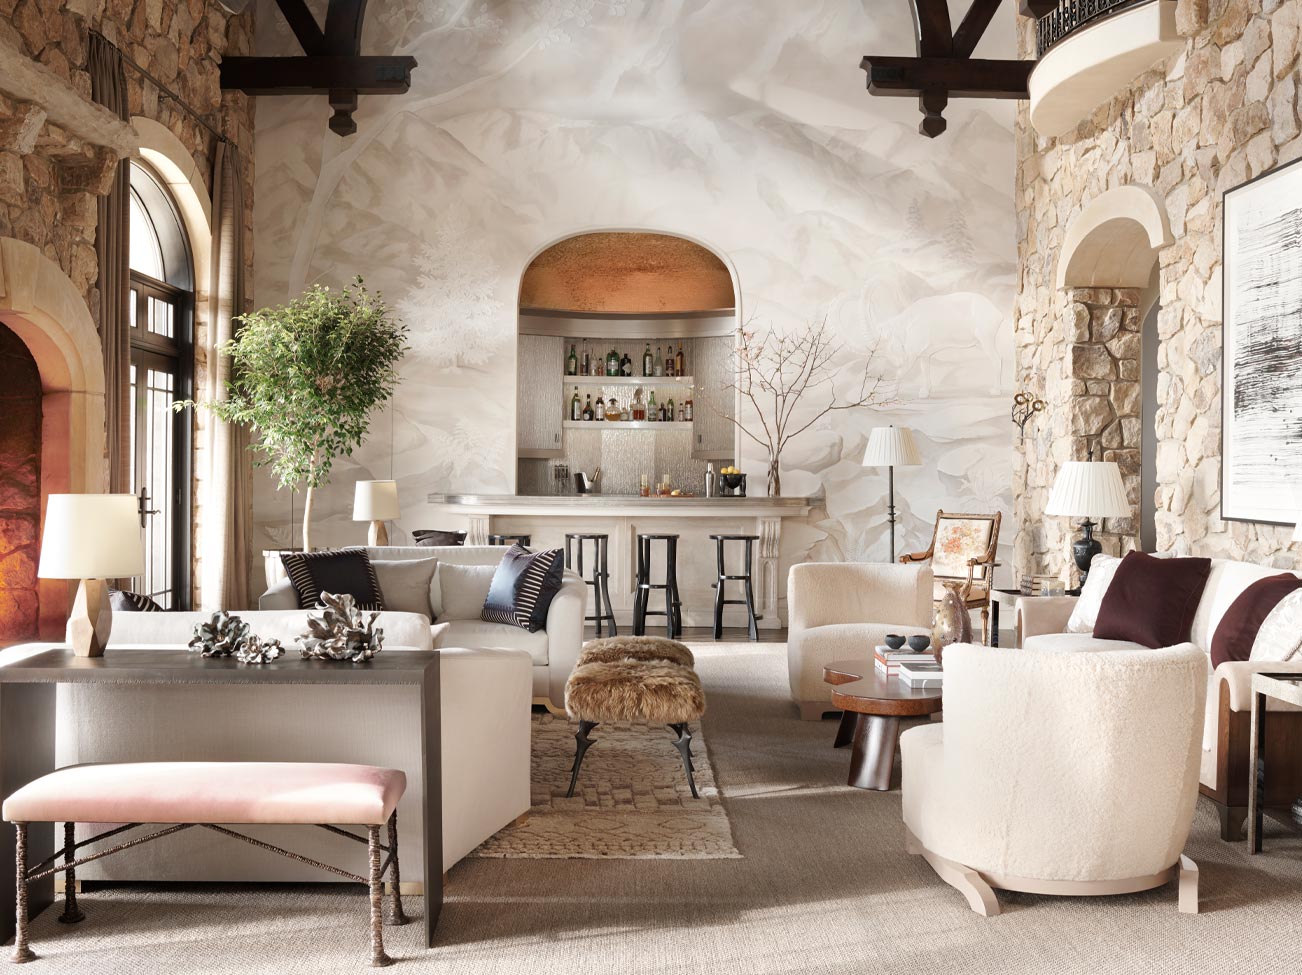 Spanish-inspired great room with stone walls and fireplace, accent wall in Venetian plaster, bar, and white seating area. 